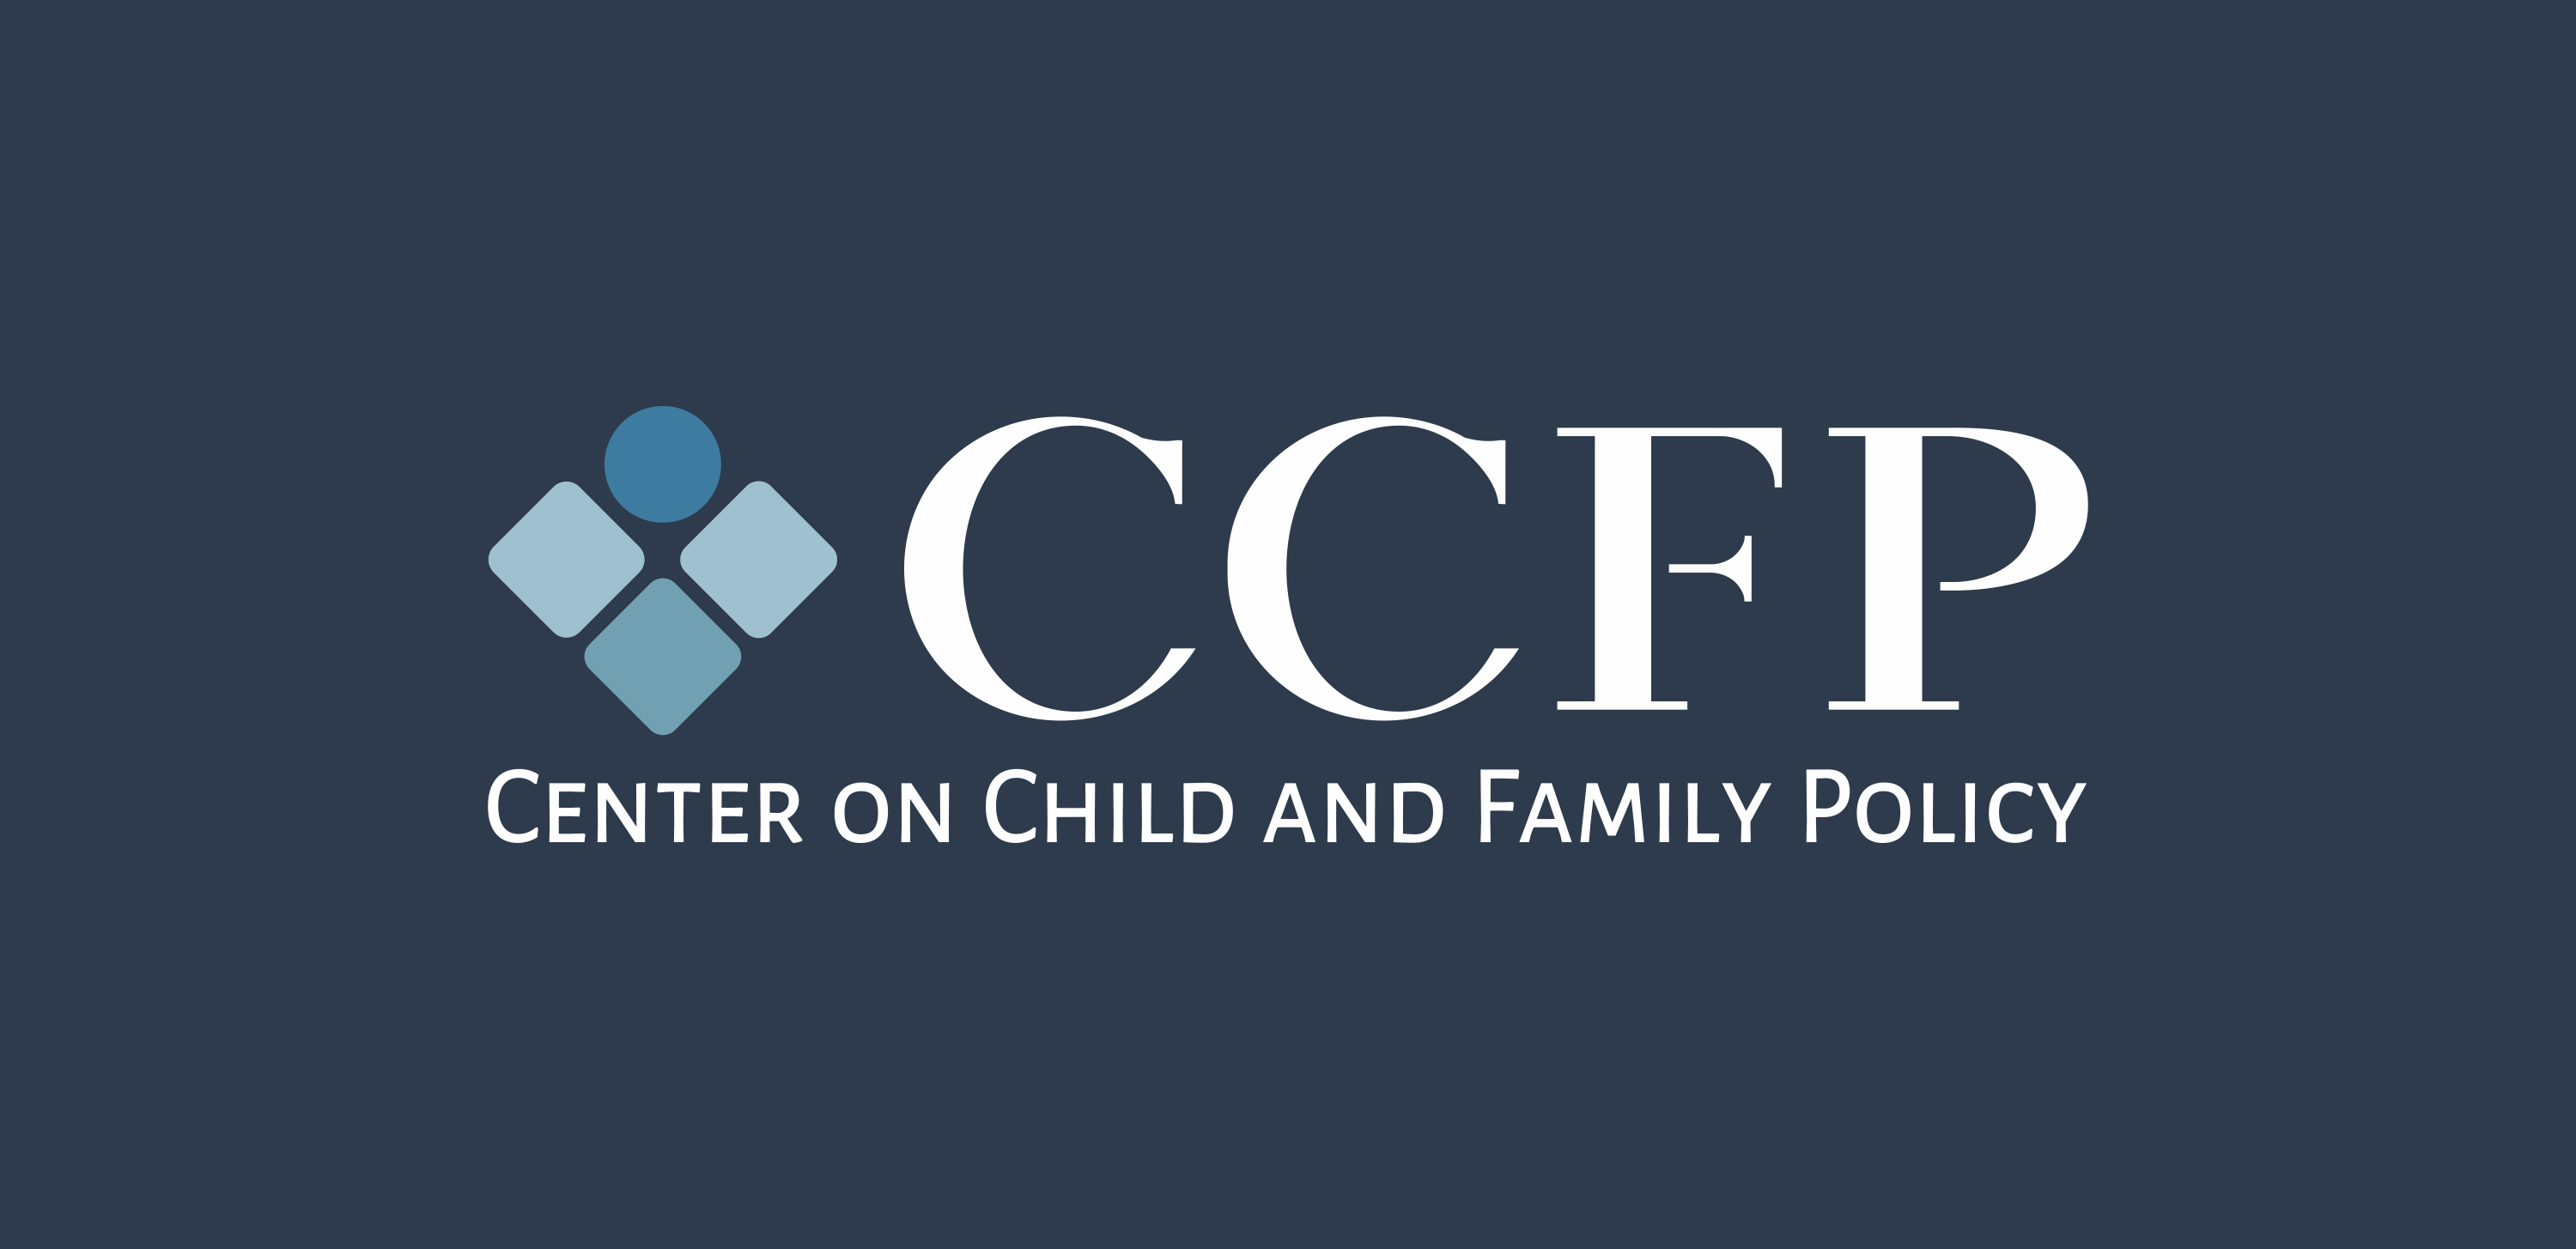 CCFP, Center on Child and Family Policy, Katharine Stevens, Washington, DC